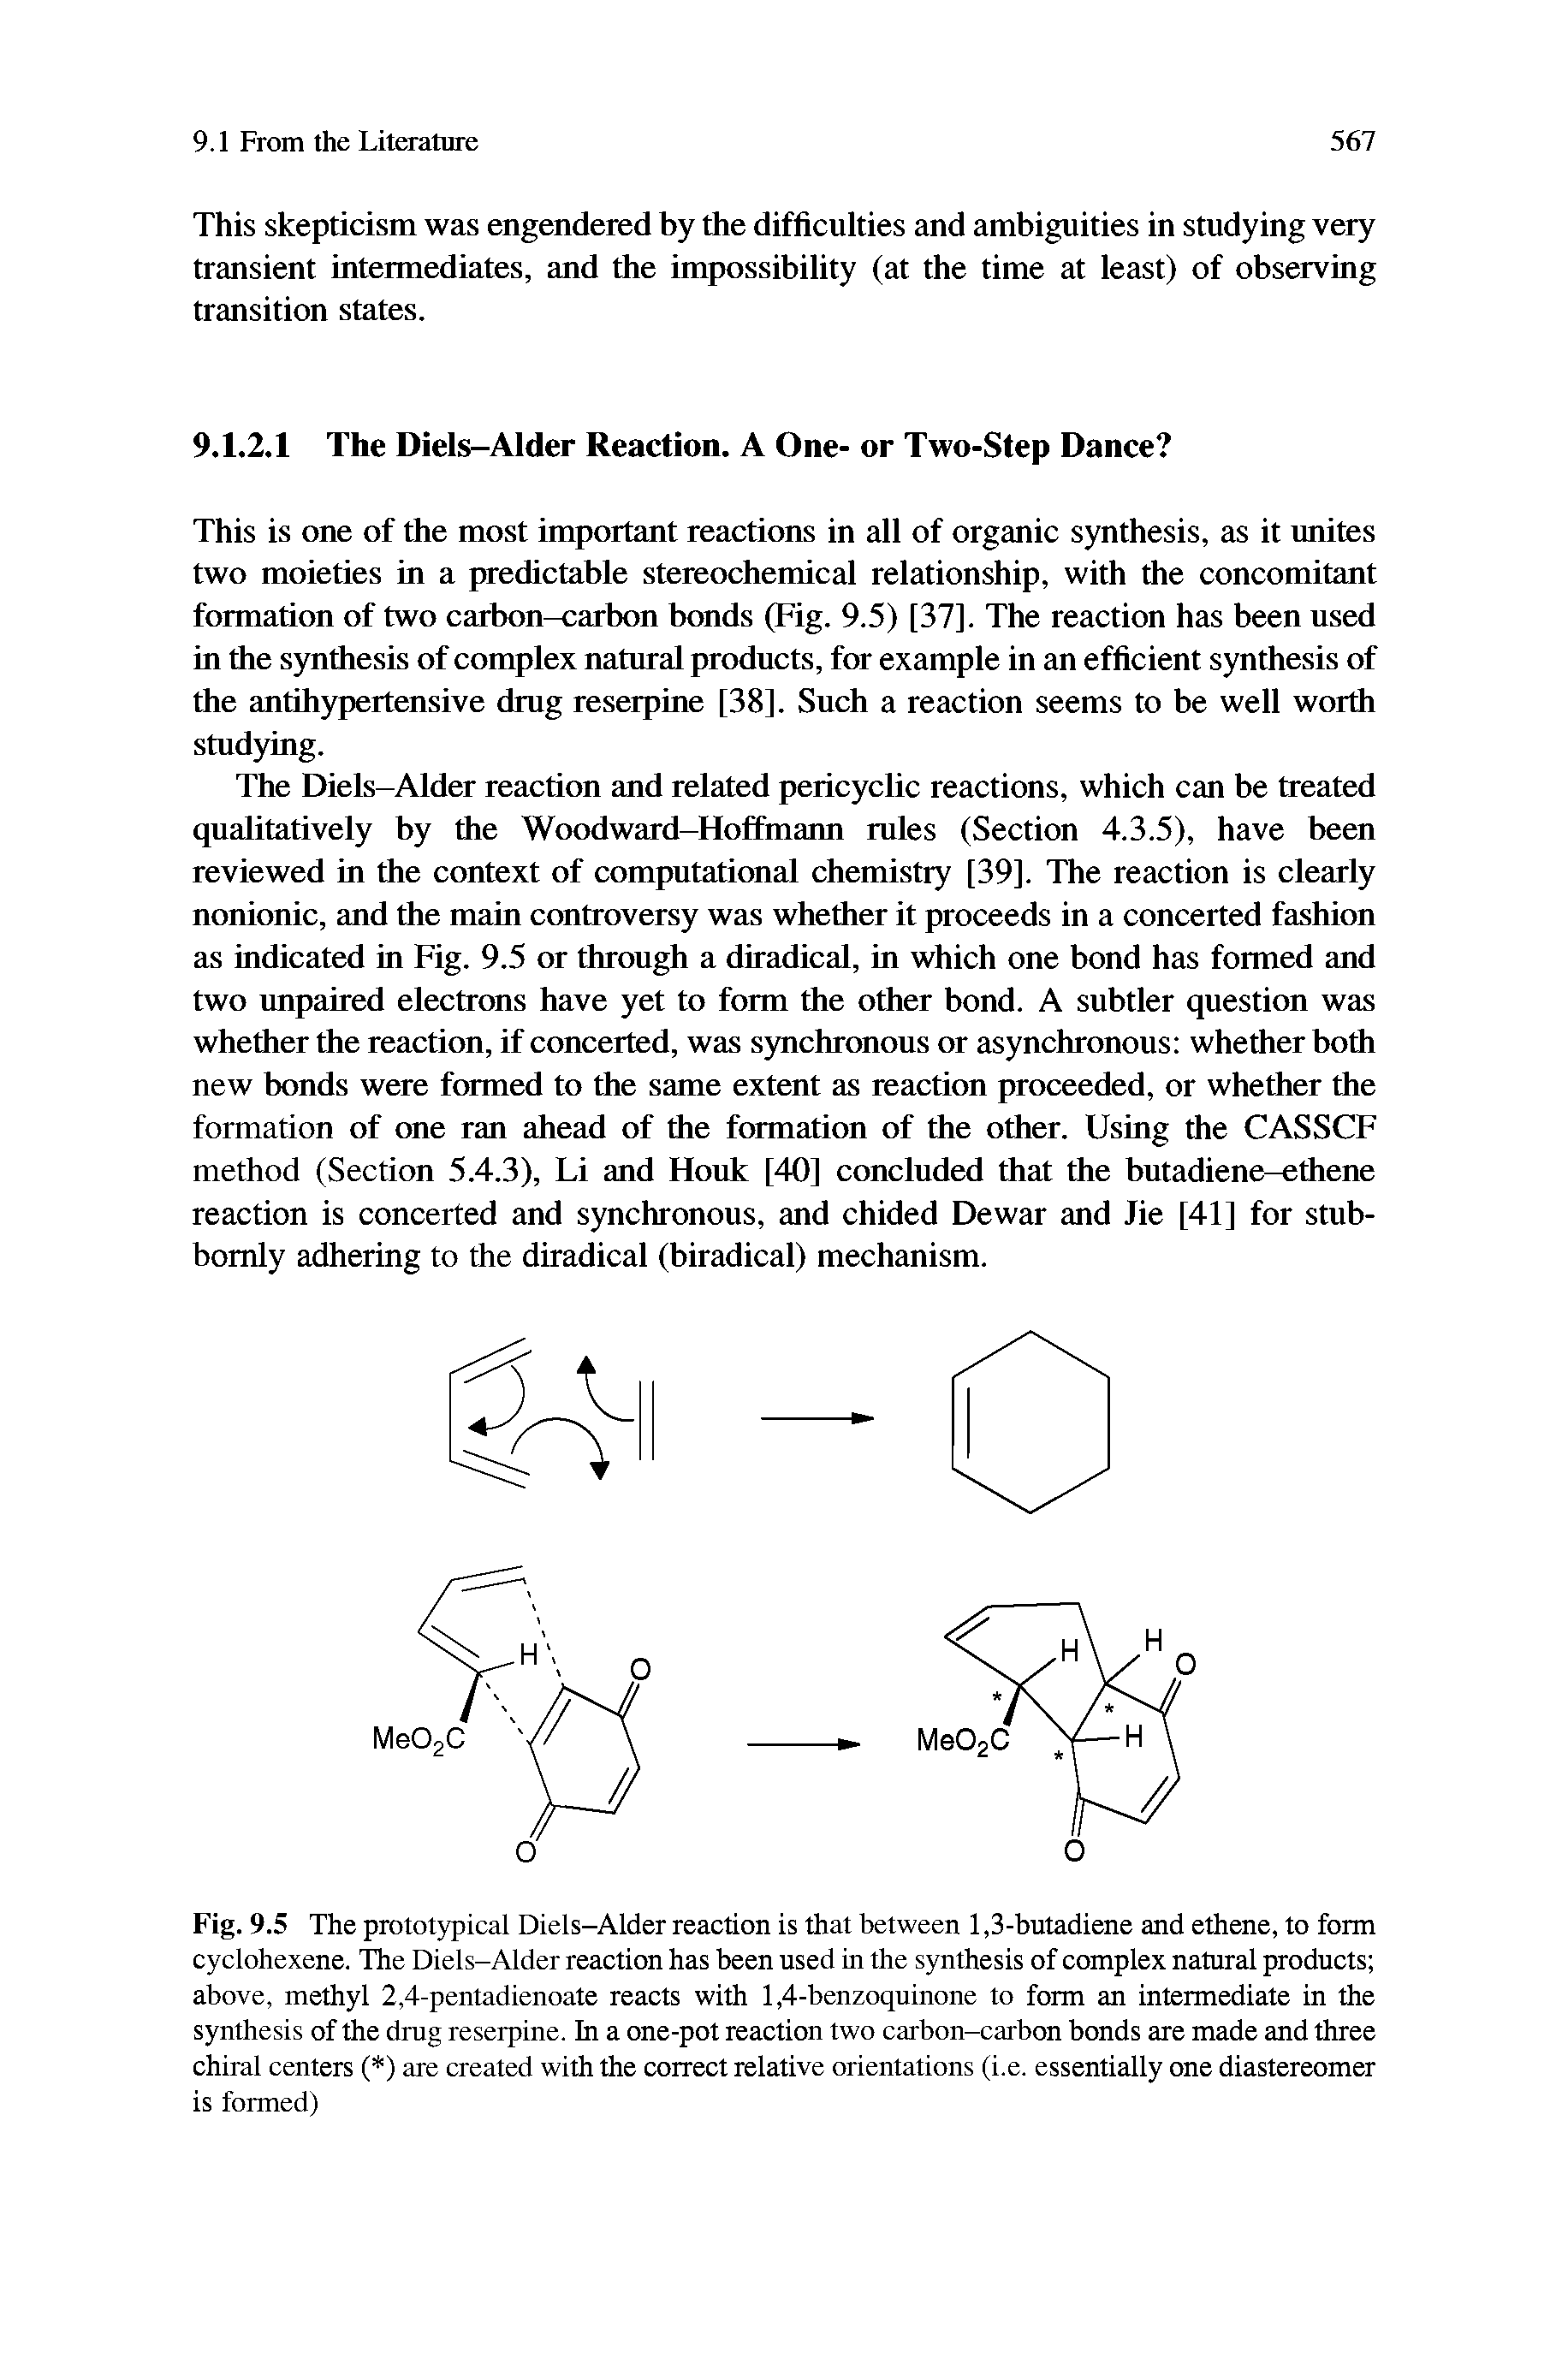 Fig. 9.5 The prototypical Diels-Alder reaction is that between 1,3-butadiene and ethene, to form cyclohexene. The Diels-Alder reaction has been used in the synthesis of complex natural products above, methyl 2,4-pentadienoate reacts with 1,4-benzoquinone to form an intermediate in the synthesis of the drug reserpine. In a one-pot reaction two carbon-carbon bonds are made and three chiral centers ( ) are created with the correct relative orientations (i.e. essentially one diastereomer is formed)...